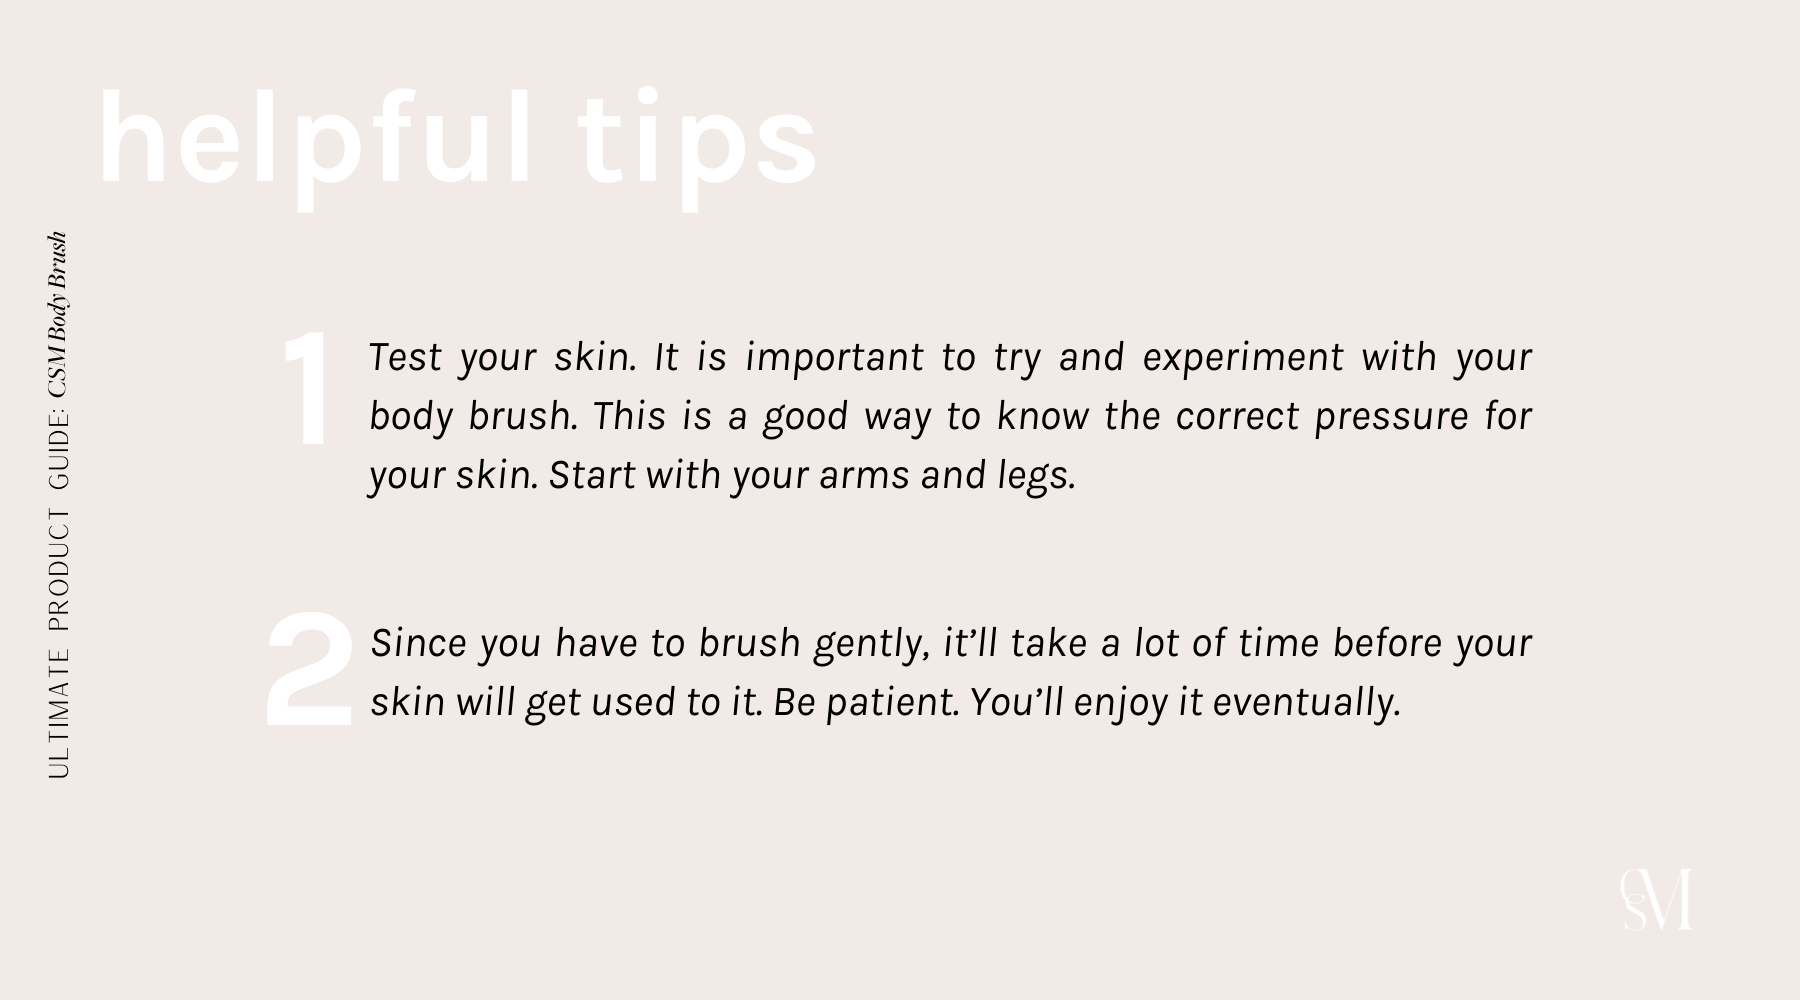 More helpful tips for your body brushing journey. 